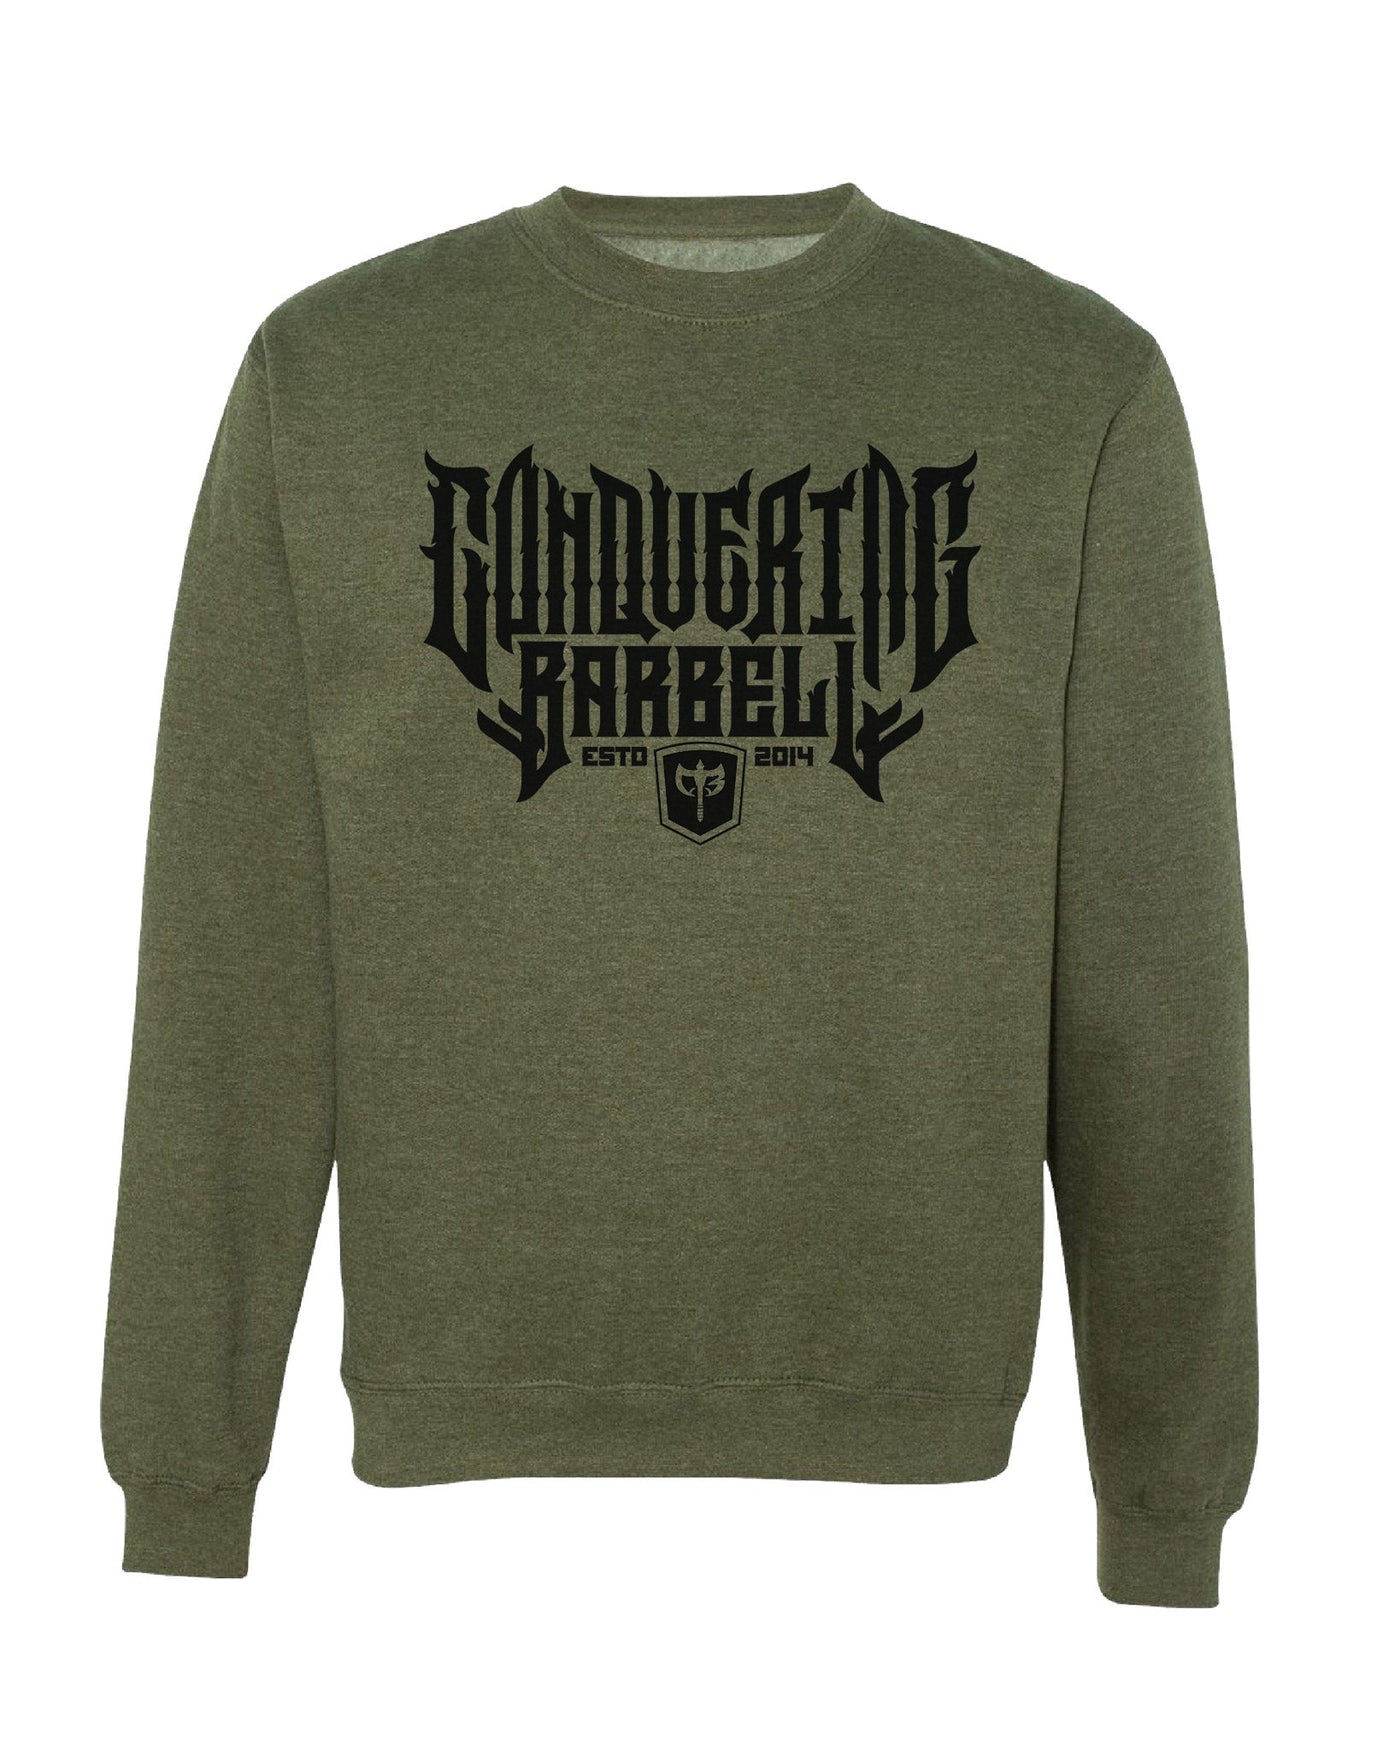 Conquering Barbell - Flagship - Crewneck - Military - Conquering Barbell